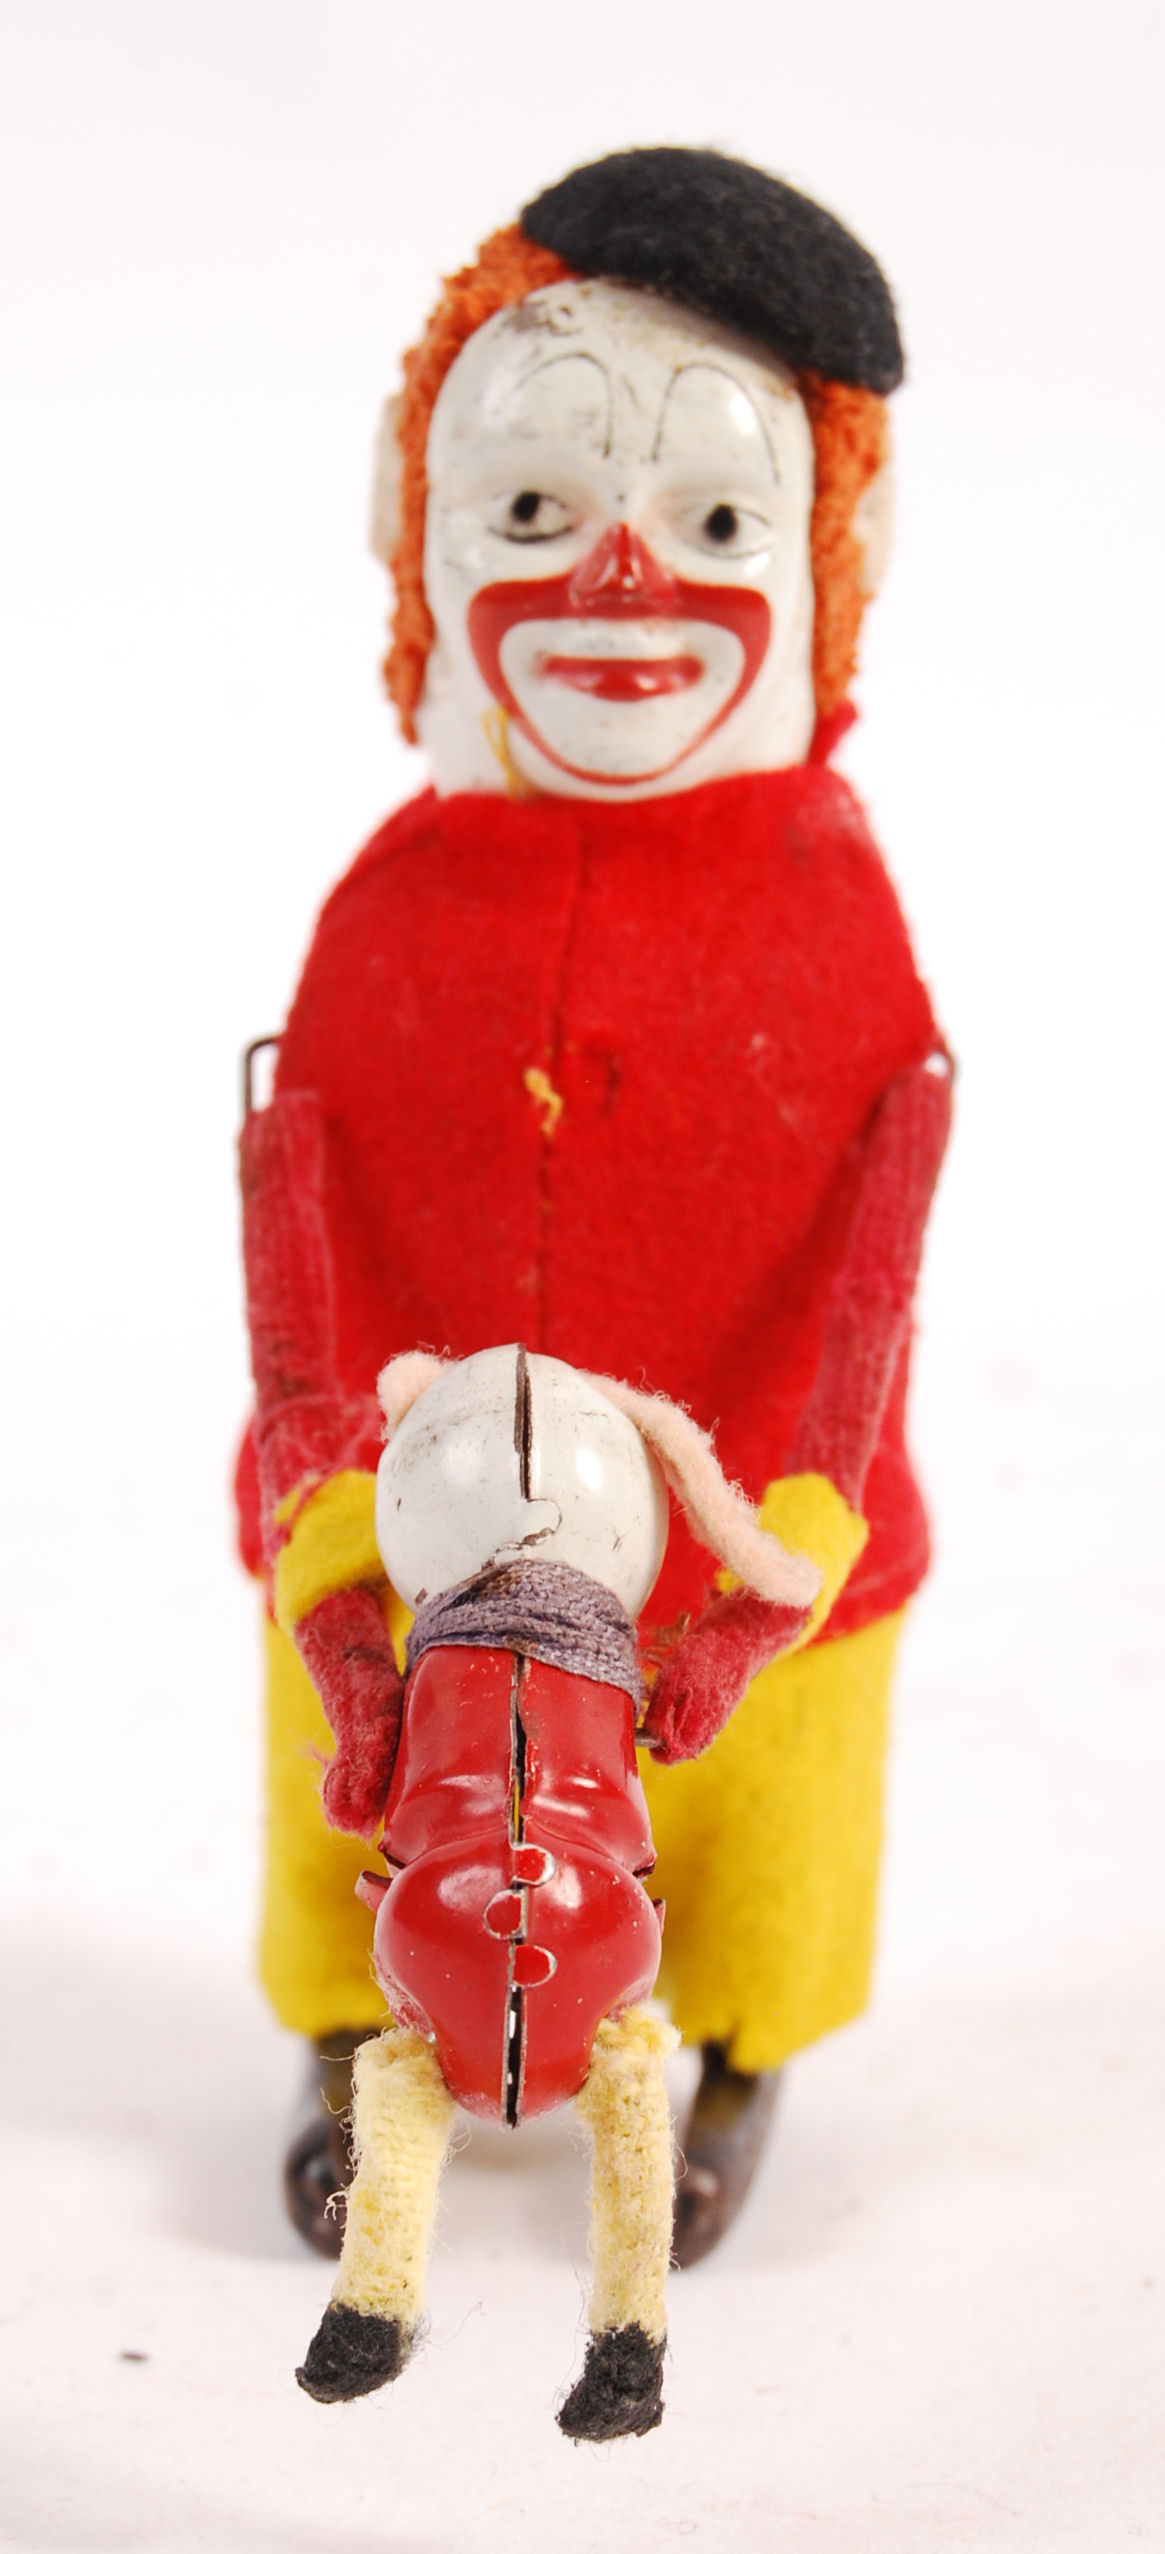 SCHUCO 1930'S CLOCKWORK CLOWN WITH ACROBATIC MOUSE - Image 4 of 6